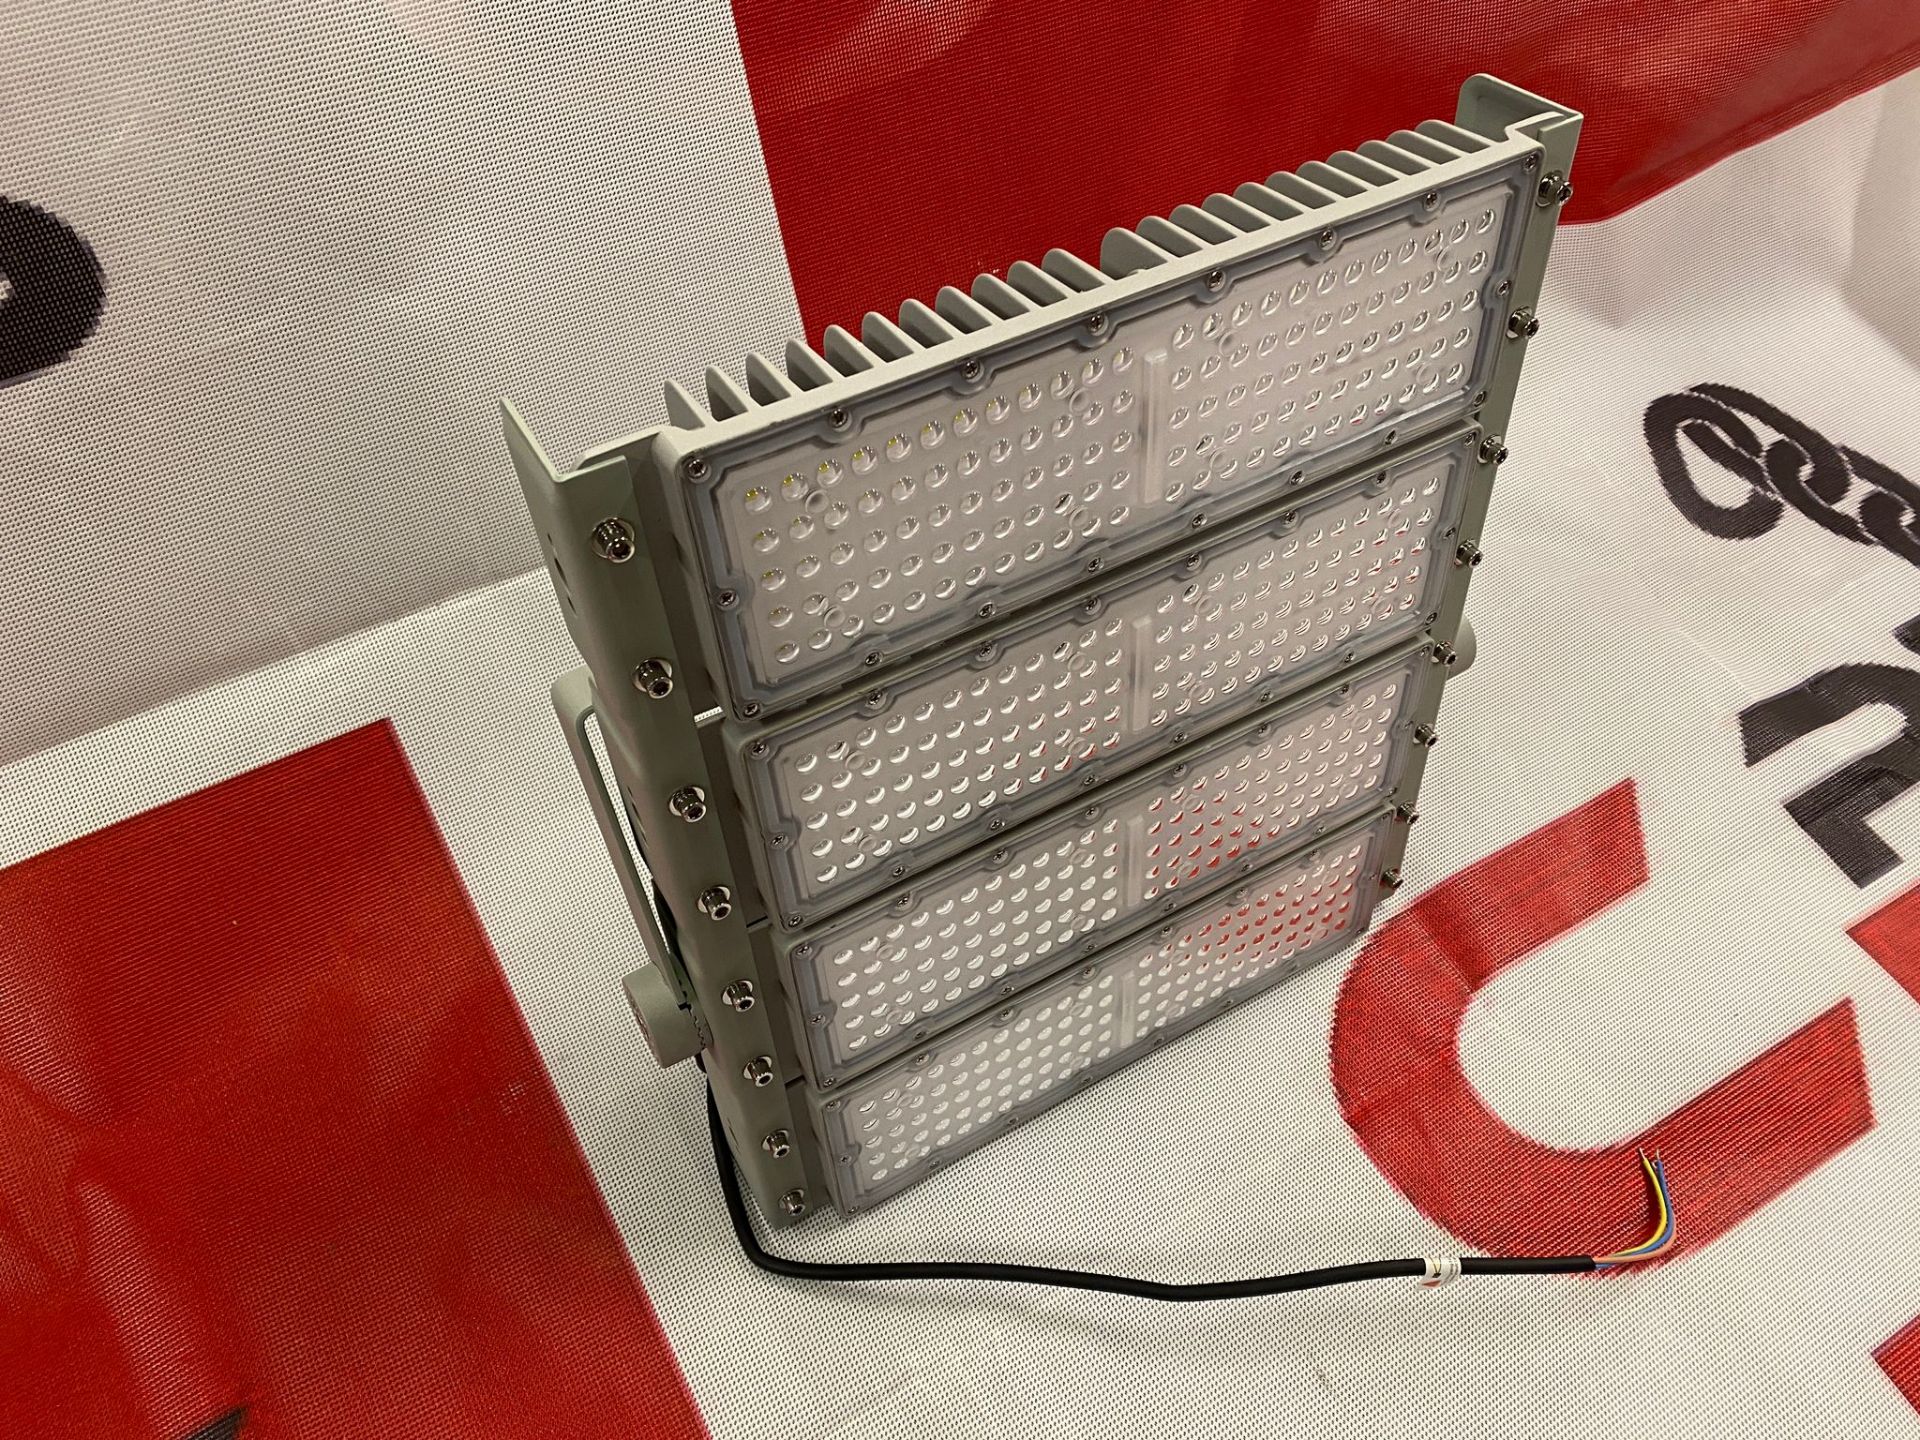 2 x LED400 Watt Flood Light Panel - For Car Parks, Security, Playing fields, Football pitches etc - Image 8 of 8